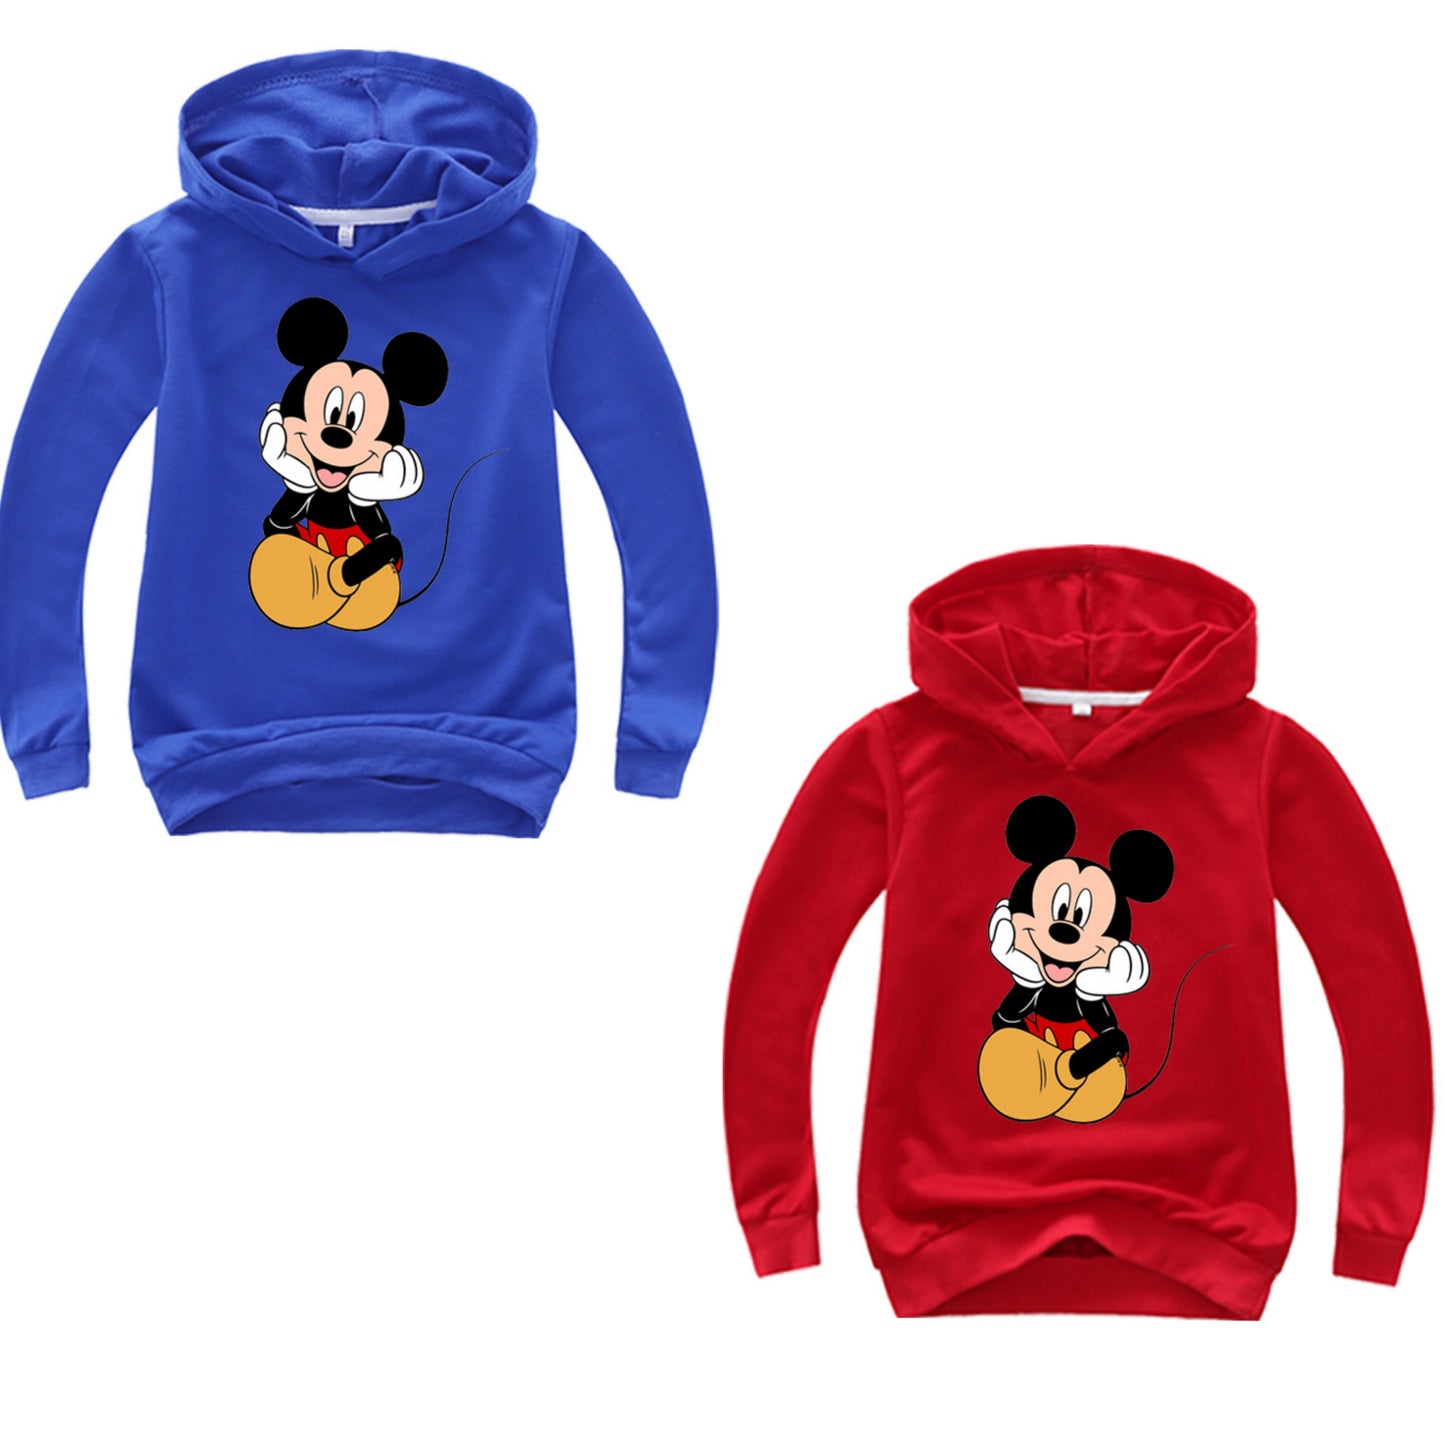 PACK OF 2 MICKEY MOUSE PRINTED KIDS HOODIES FOR BOYS (Print 101)